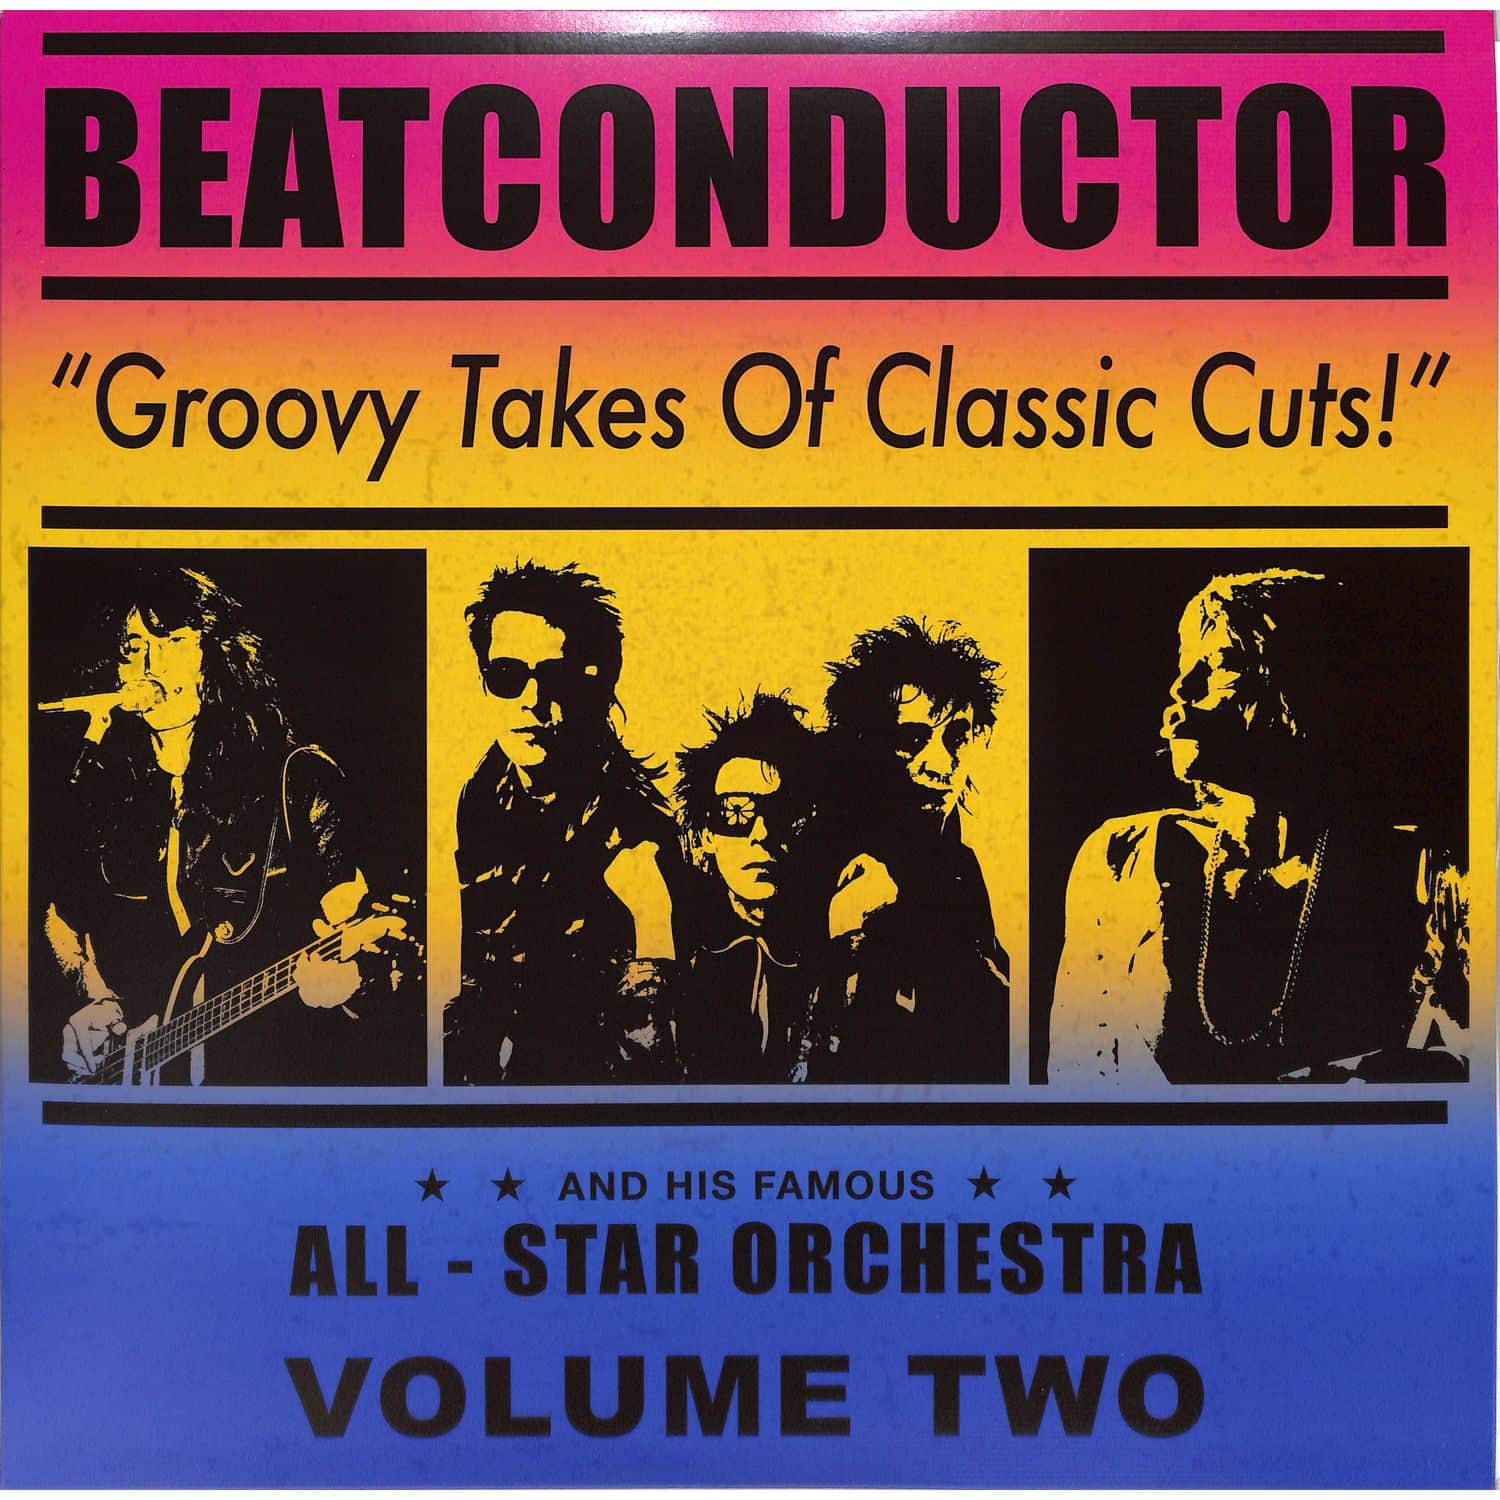 Beatconductor - REWORKS VOLUME TWO 